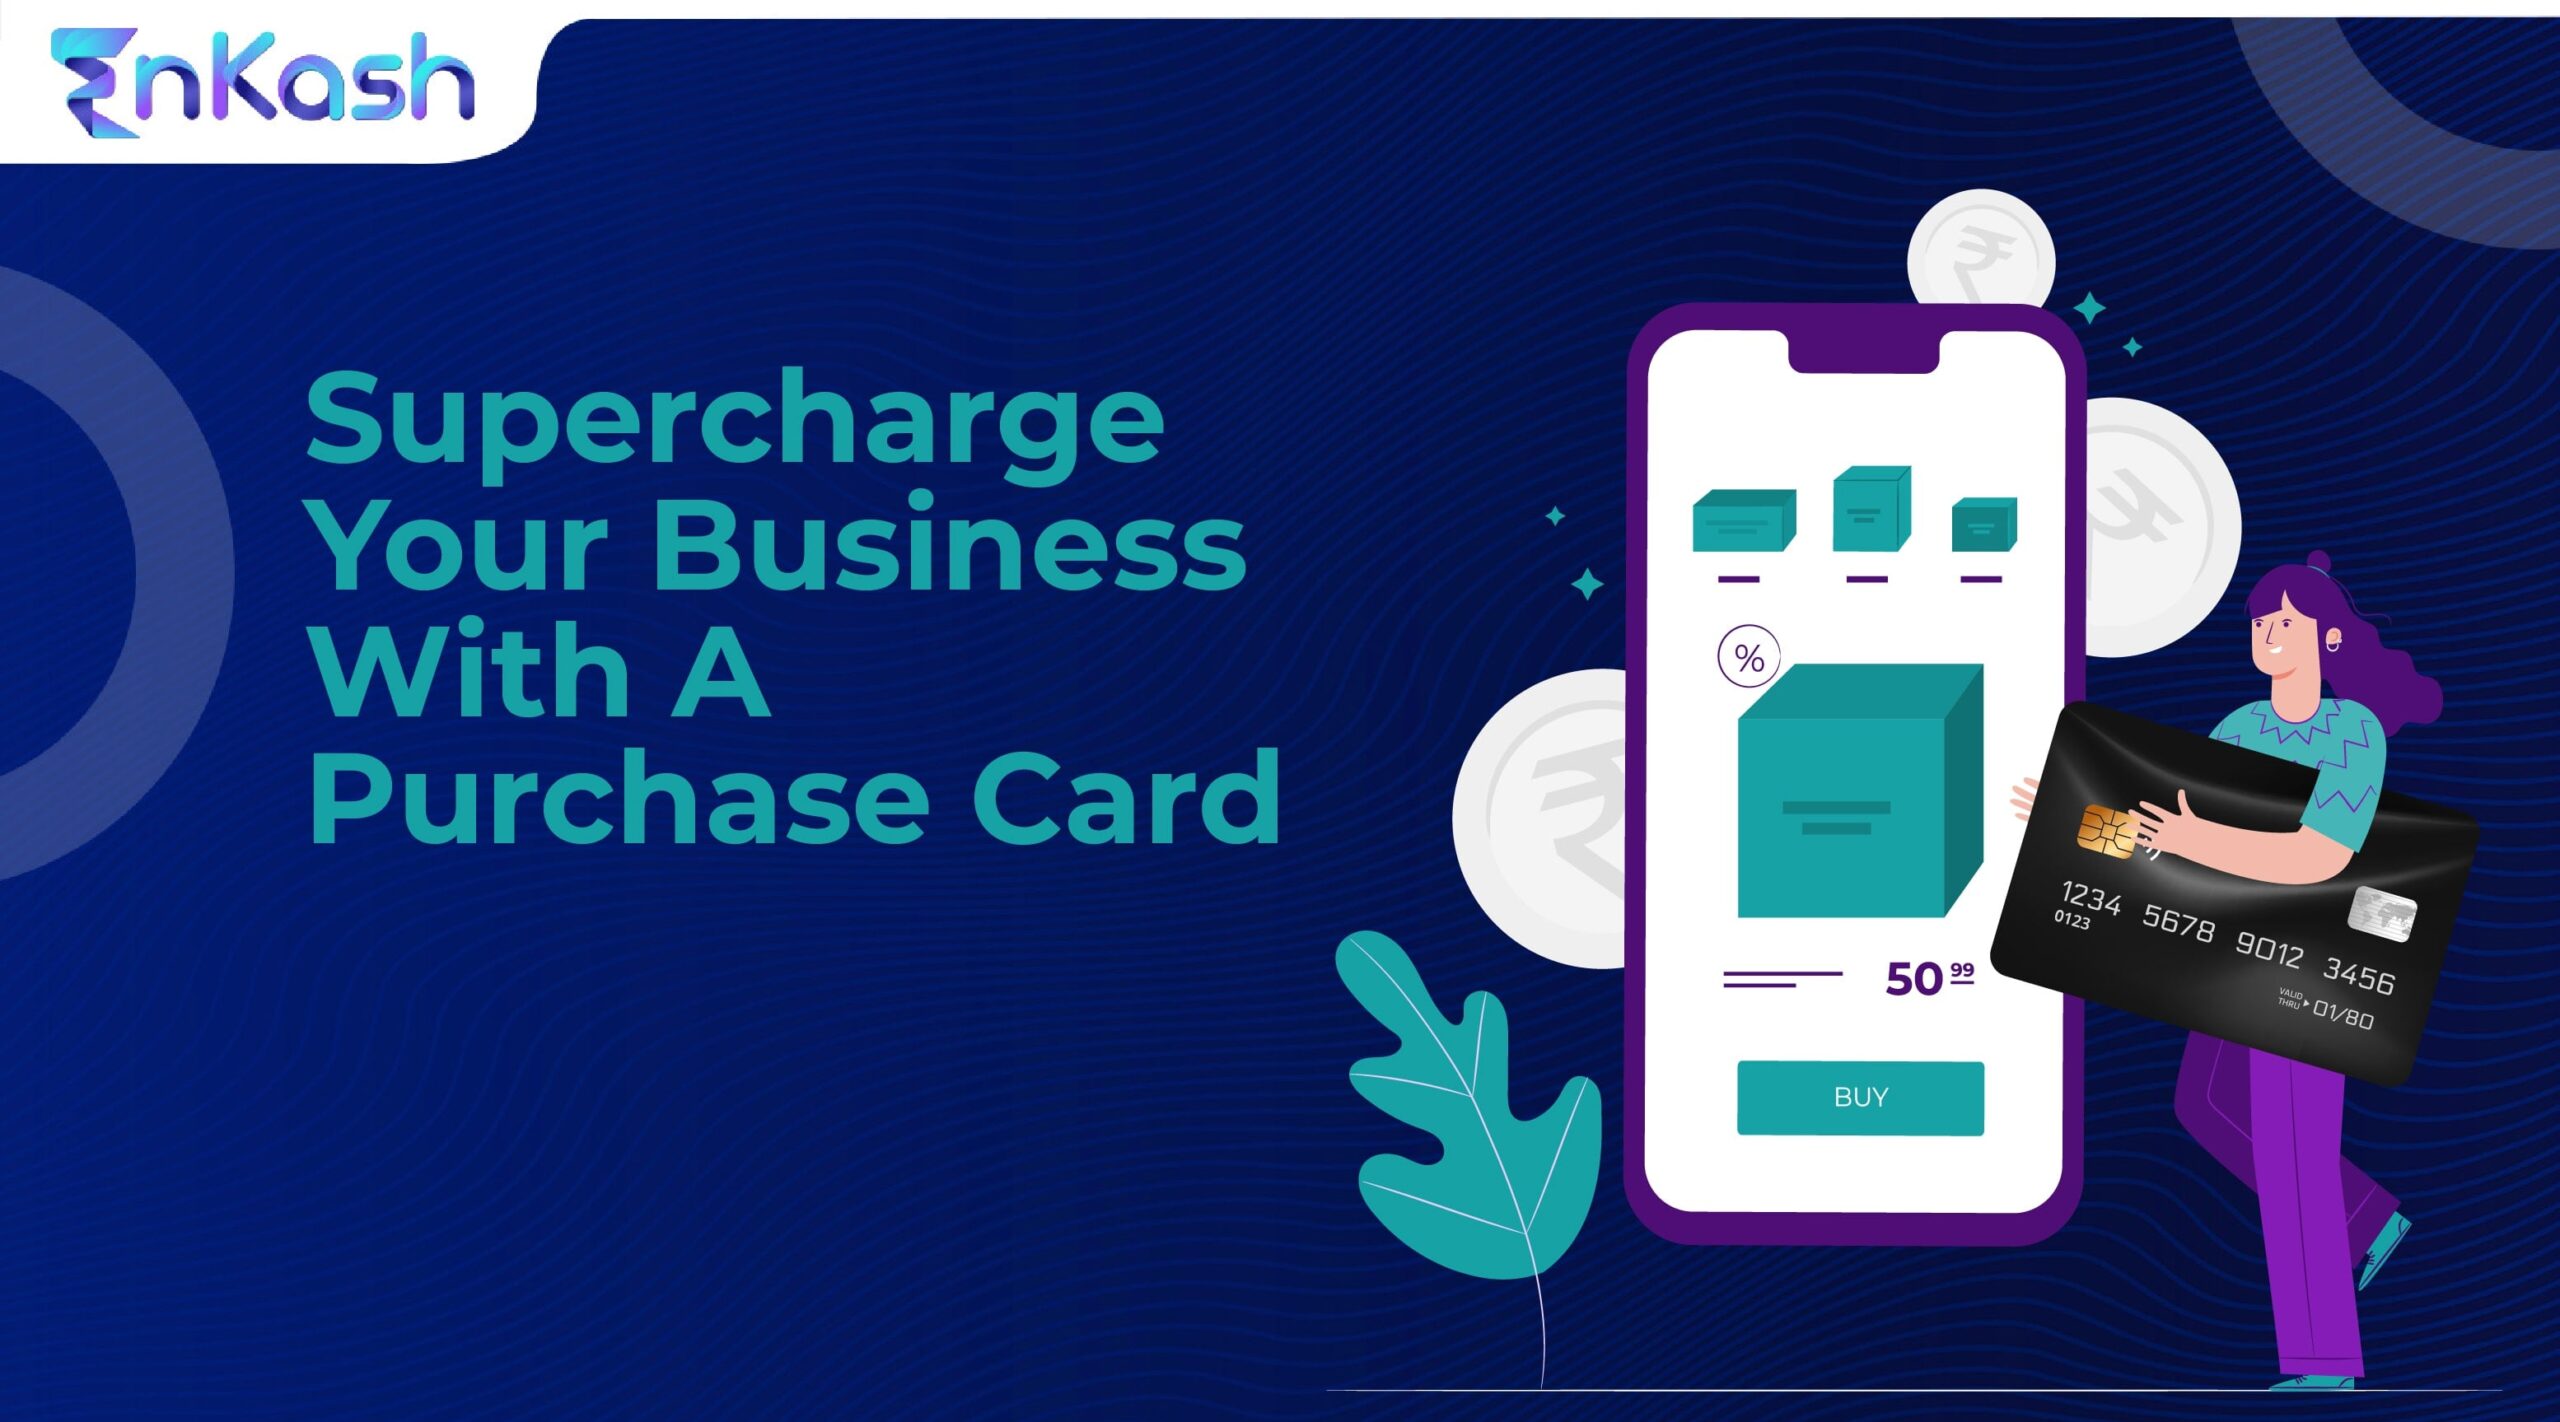 Supercharge Your Business with a Purchase Card